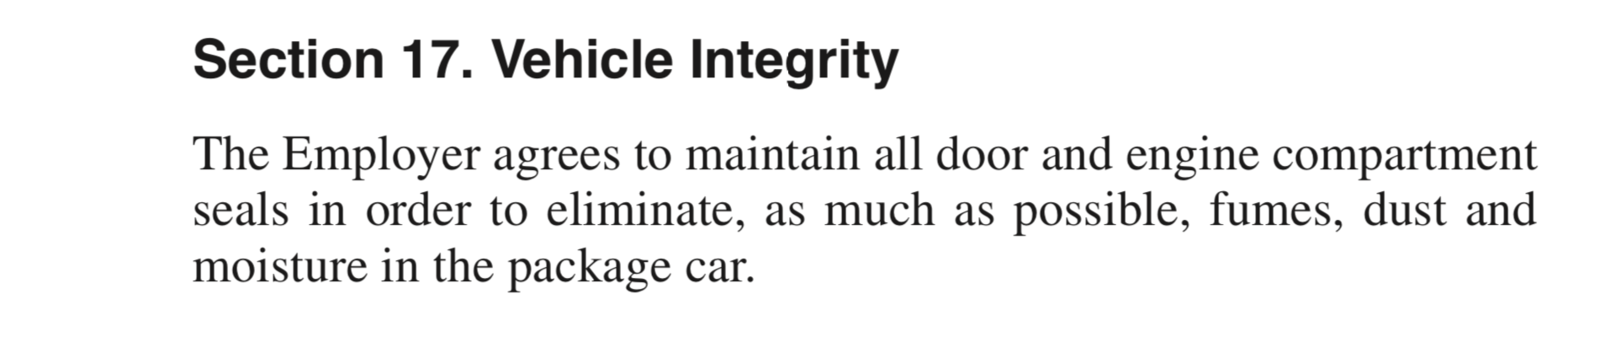 Article 18 (Vehicle Integrity).png